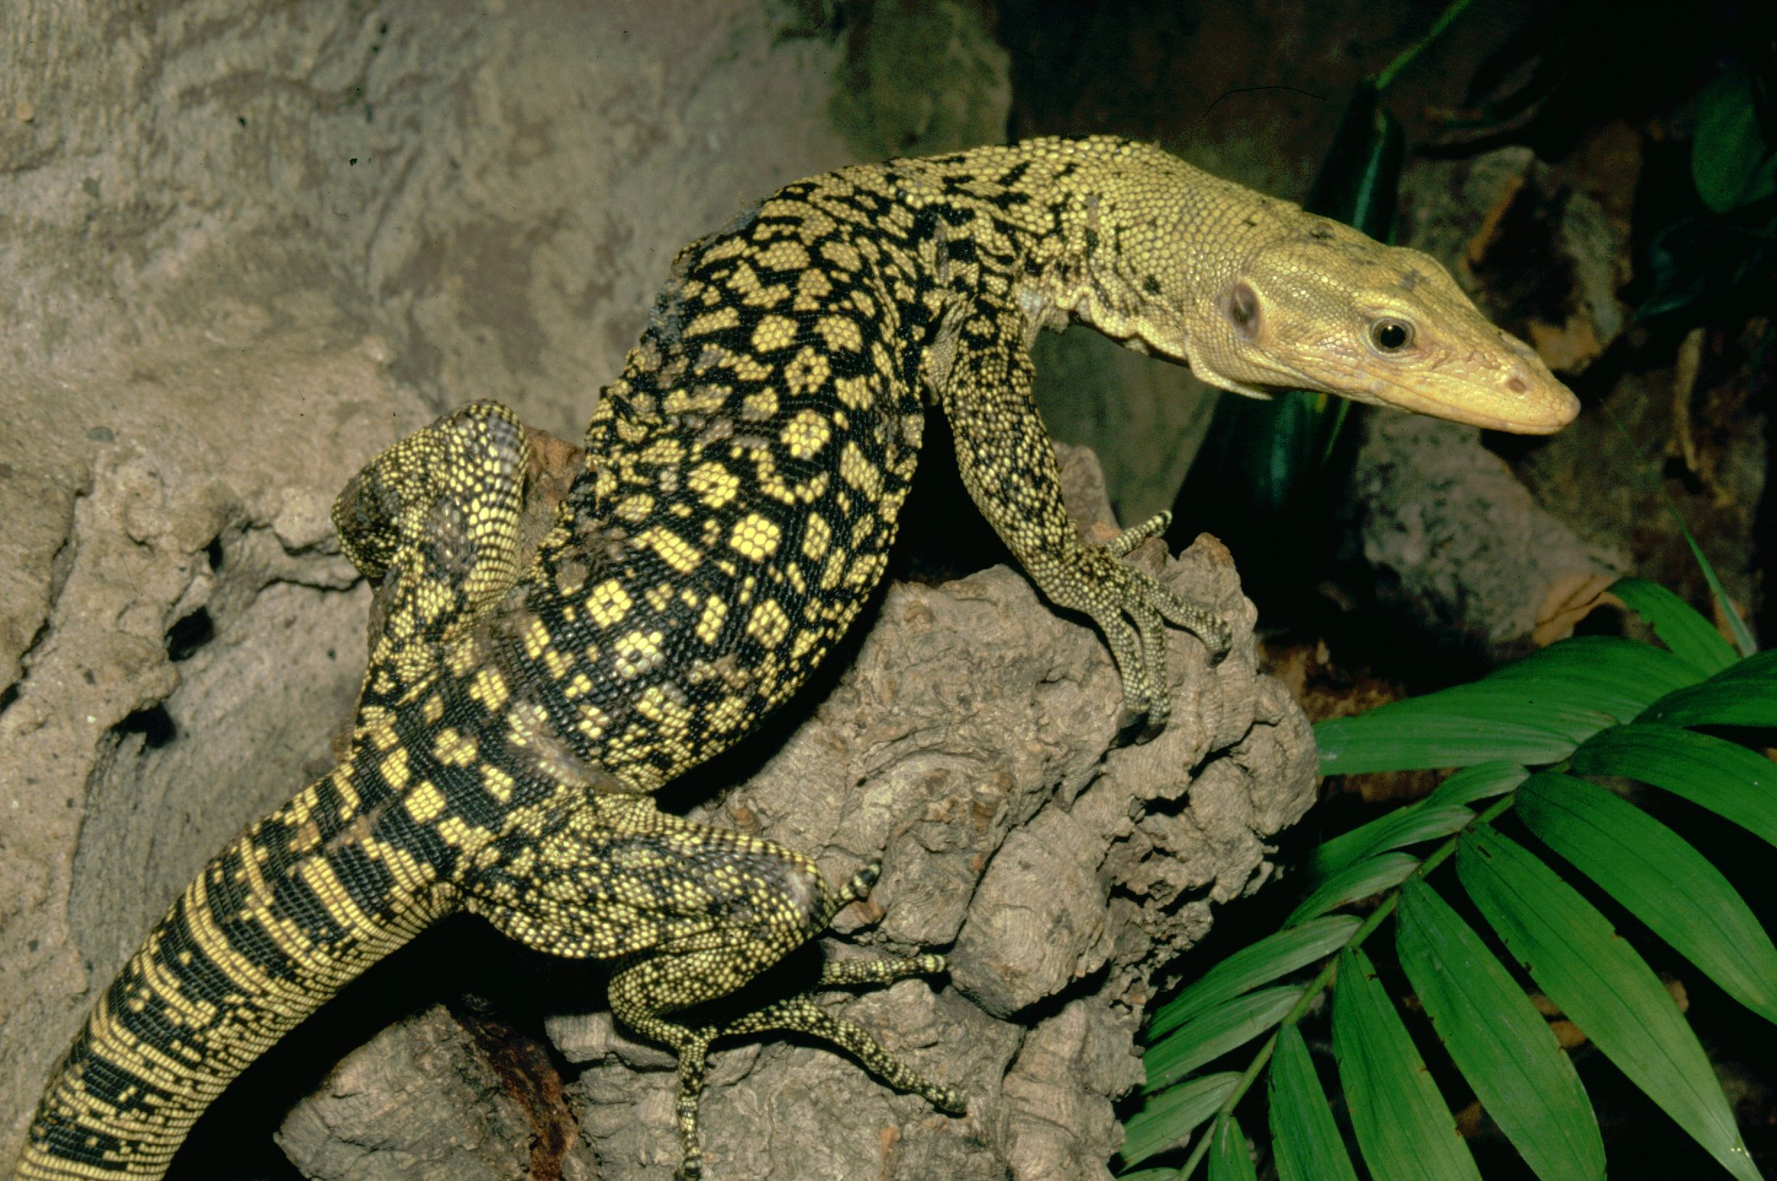 large domestic lizards